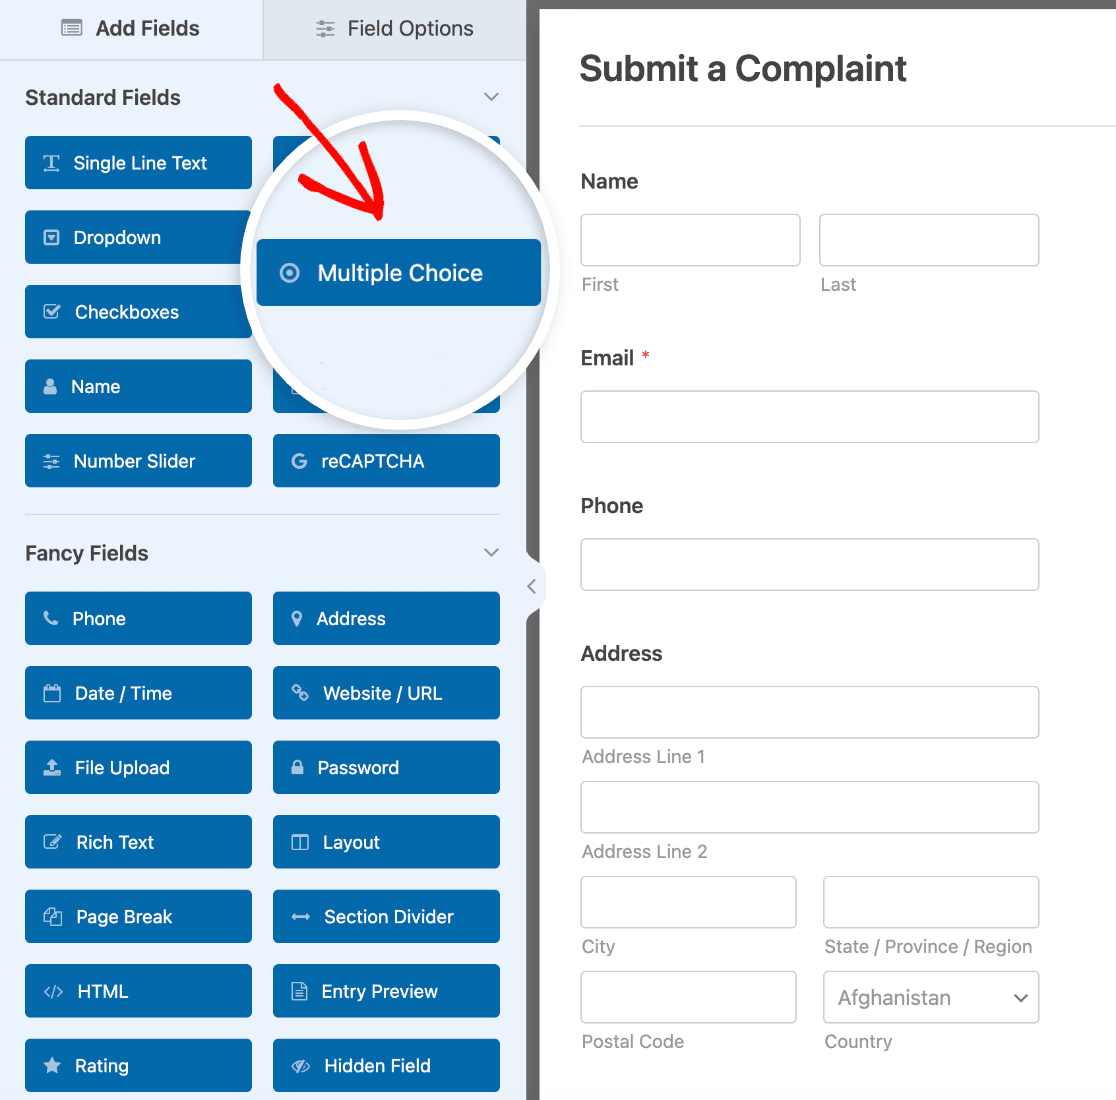 Adding a Multiple Choice field to a complaint form